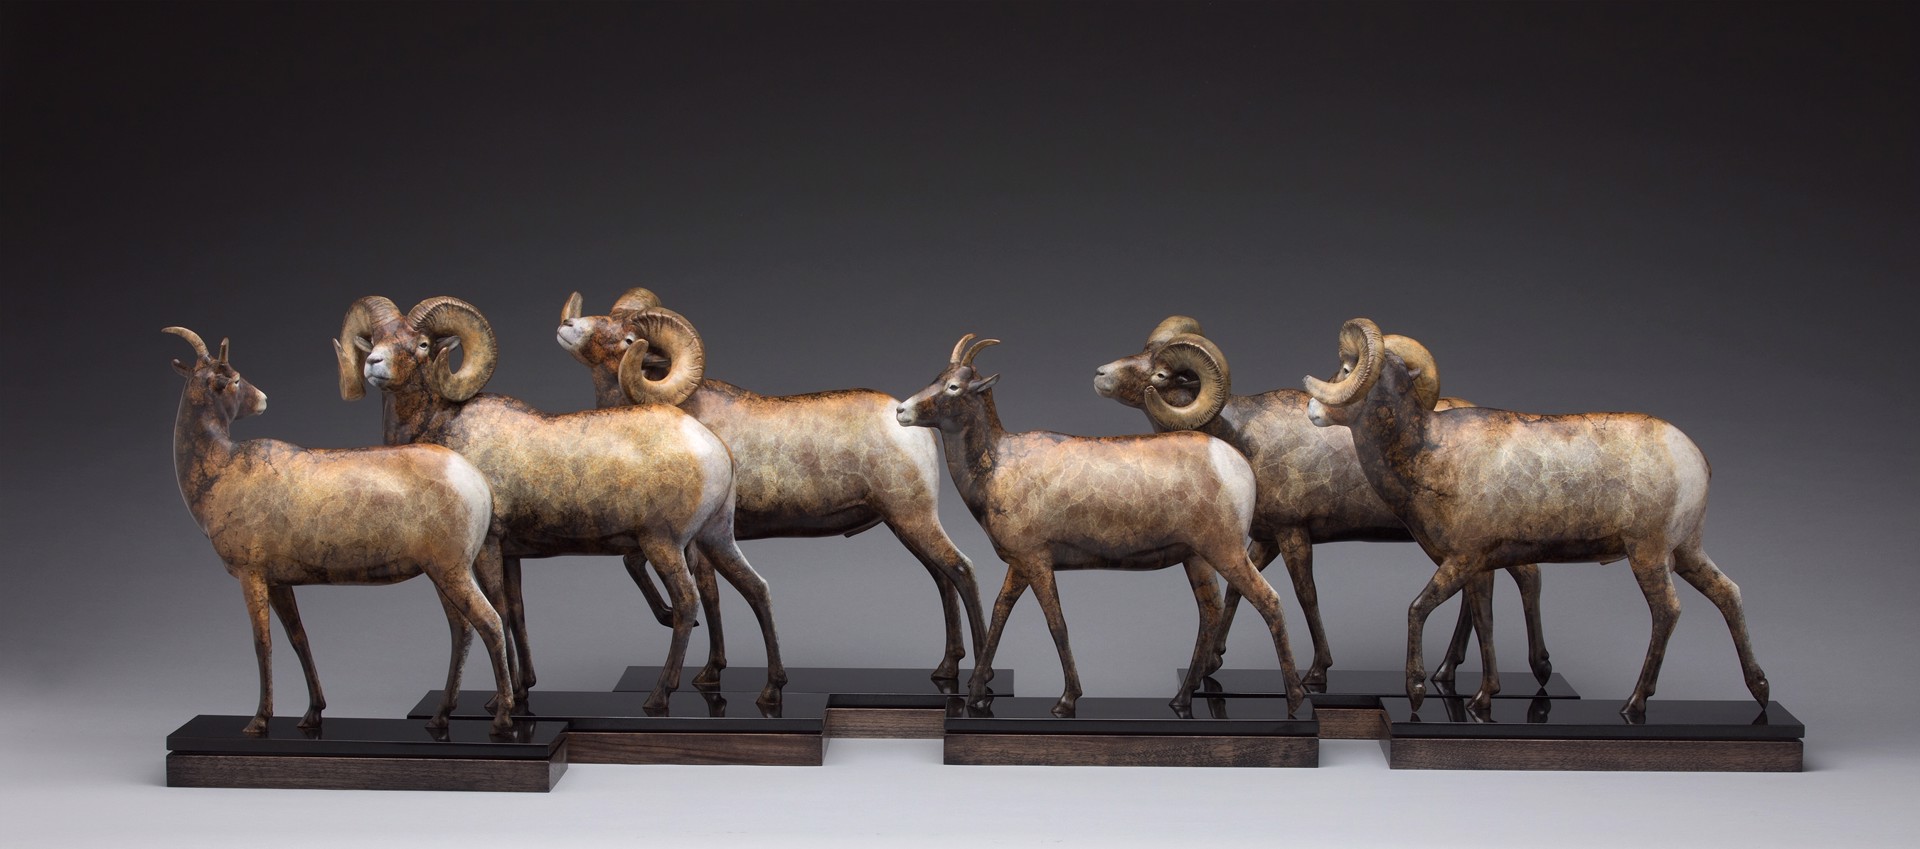 Maquette Herd of Sheep by Joshua Tobey